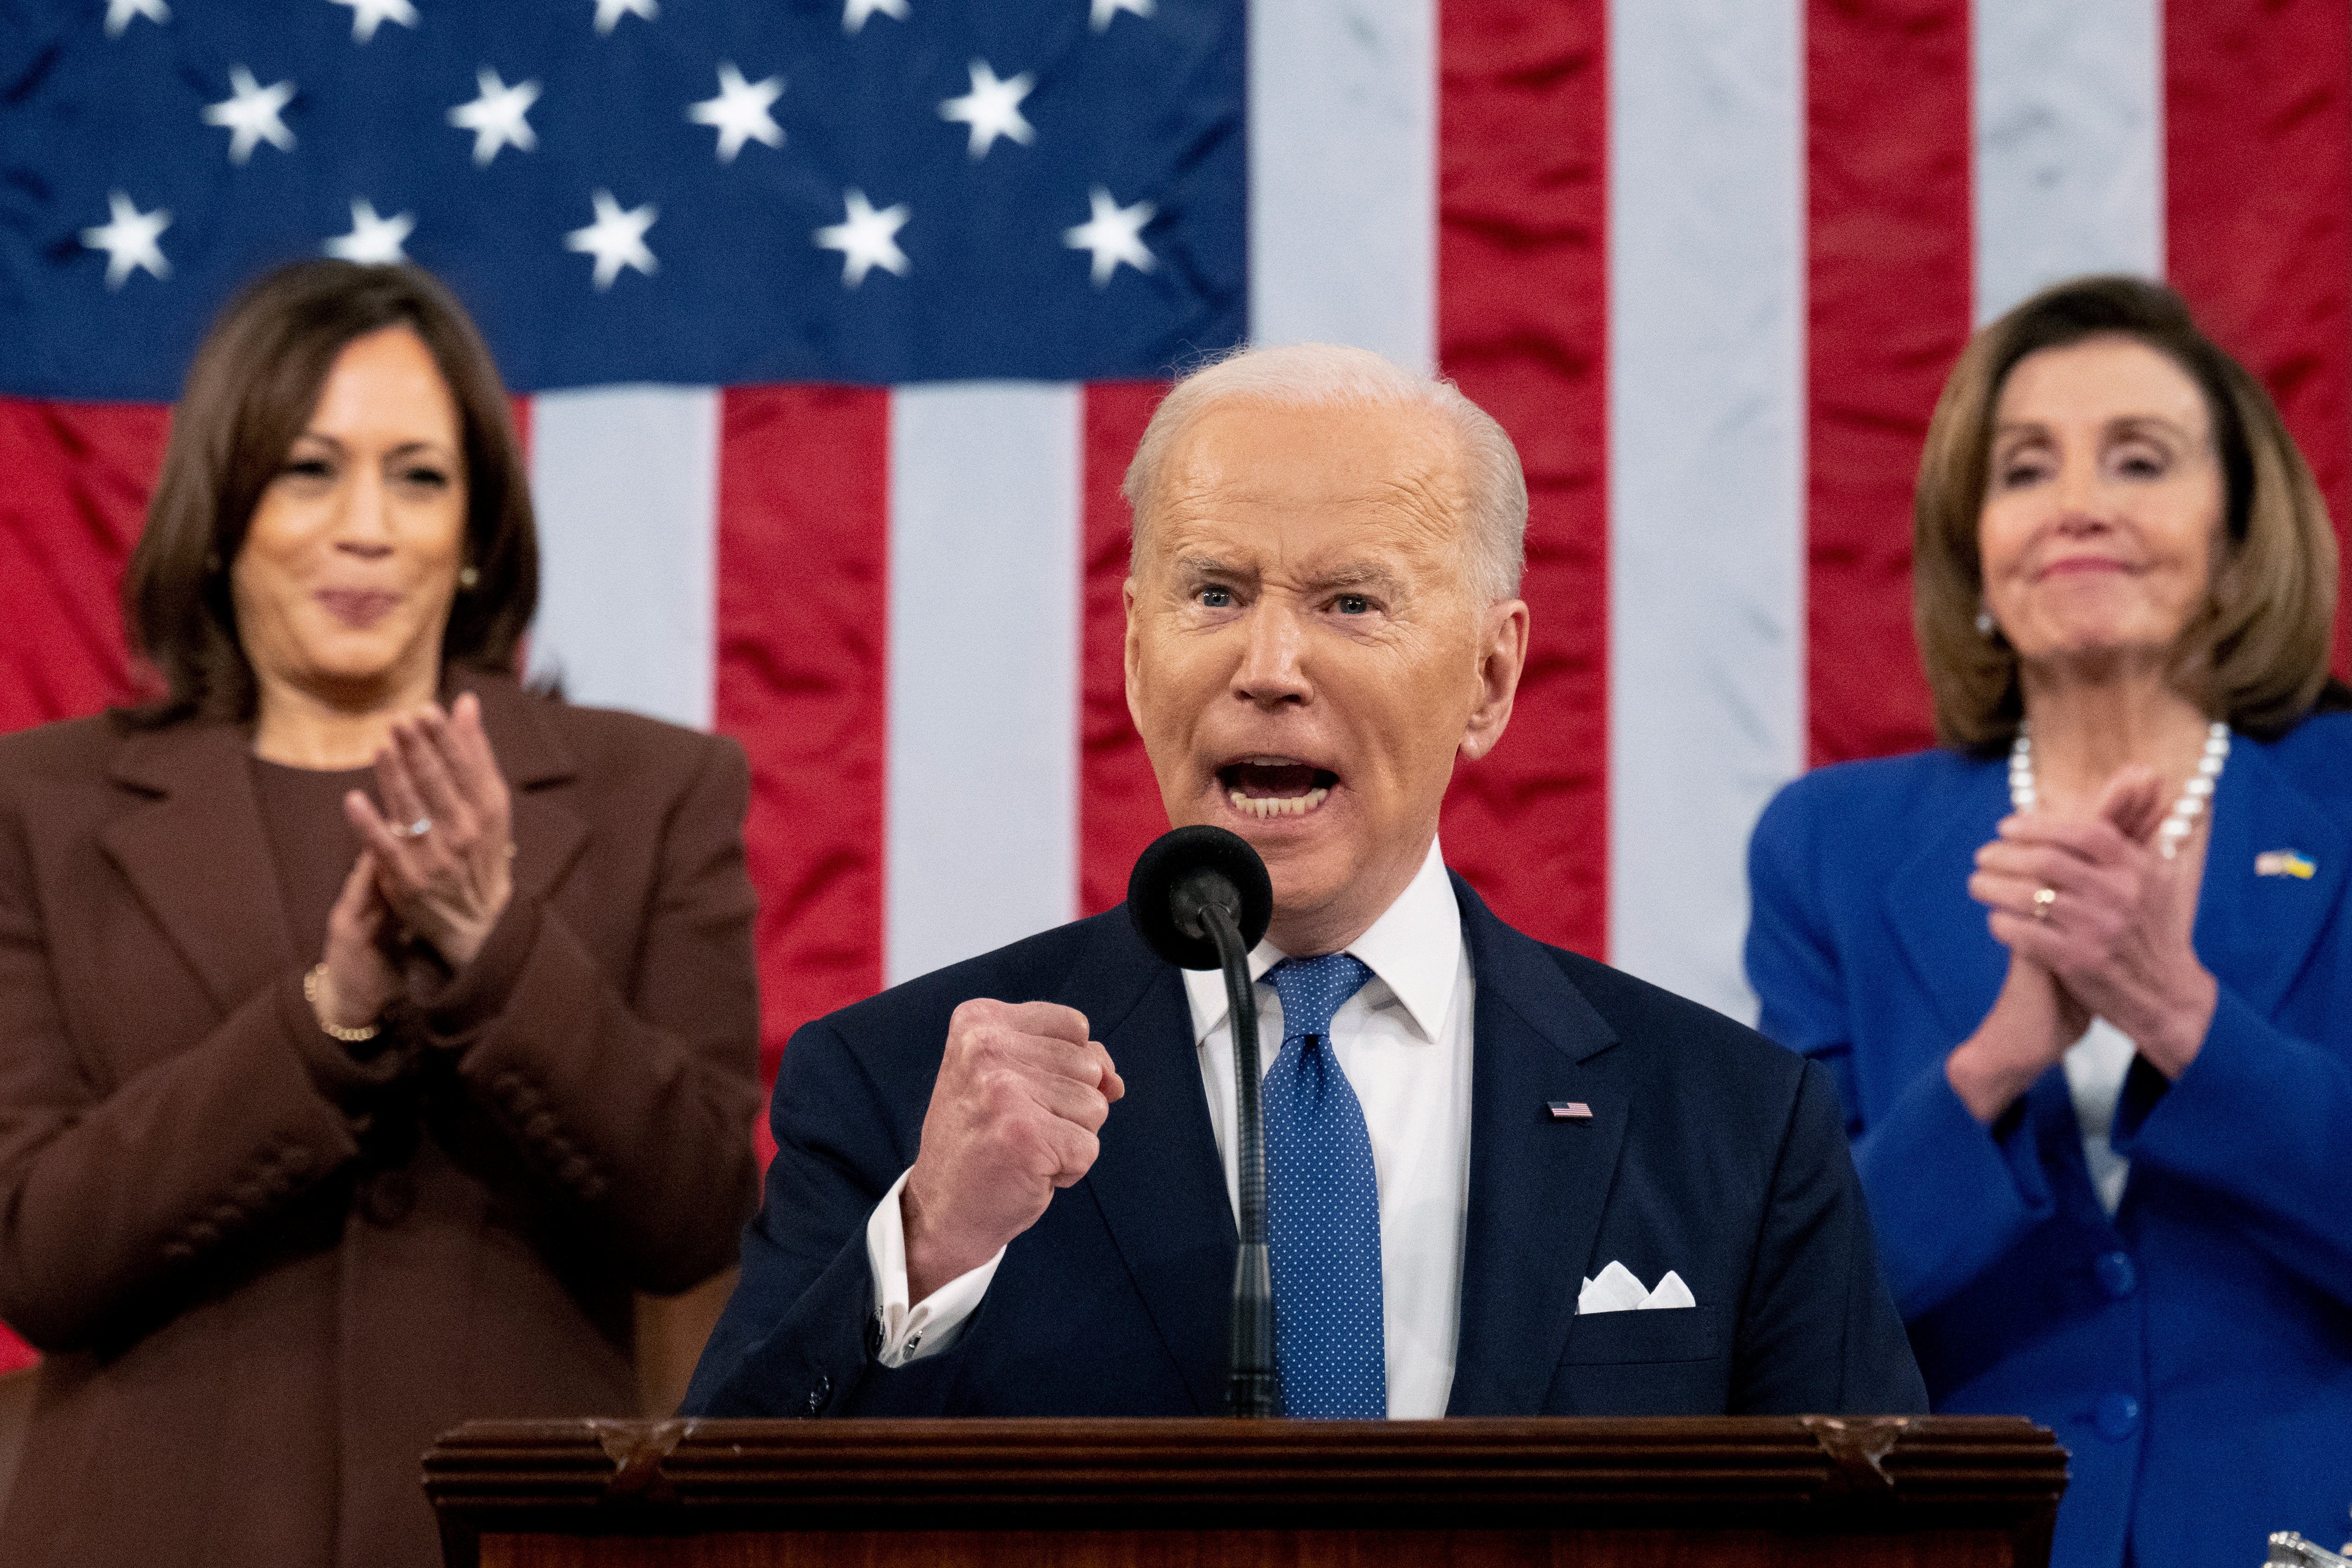 President Joe Biden delivers his first State of the Union address to a joint session of Congress at the Capitol, as Vice President Kamala Harris and House Speaker Nancy Pelosi of Calif., watch, Tuesday, March 1, 2022, in Washington.